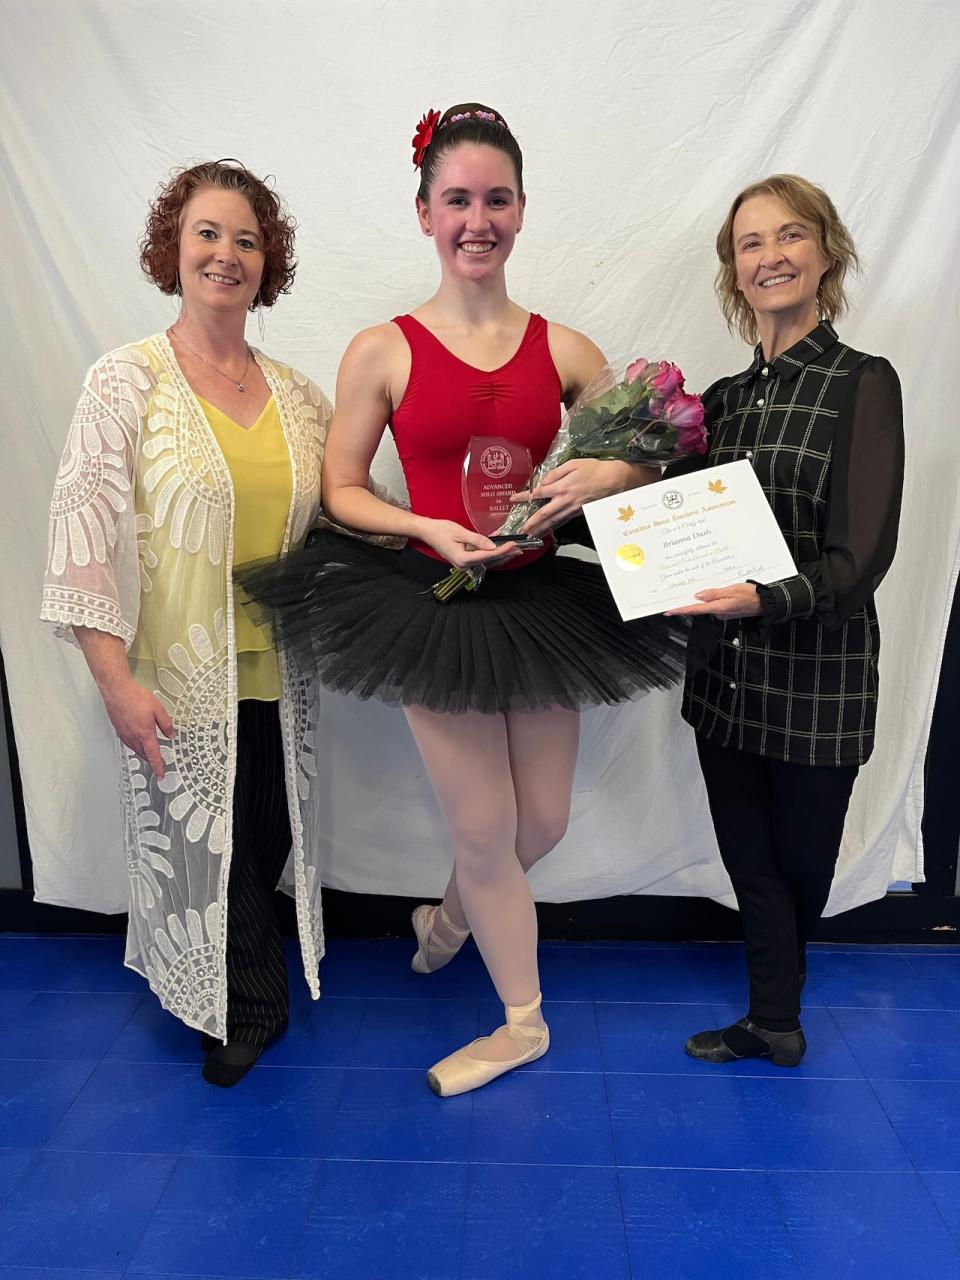 Brianna Dash, 20, passed the Advanced Solo Award Ballet exam in March after months of training with her dance instructor of 17 years Melissa Wallace, left, in Swift Current, Sask. (Creative Kids - image credit)